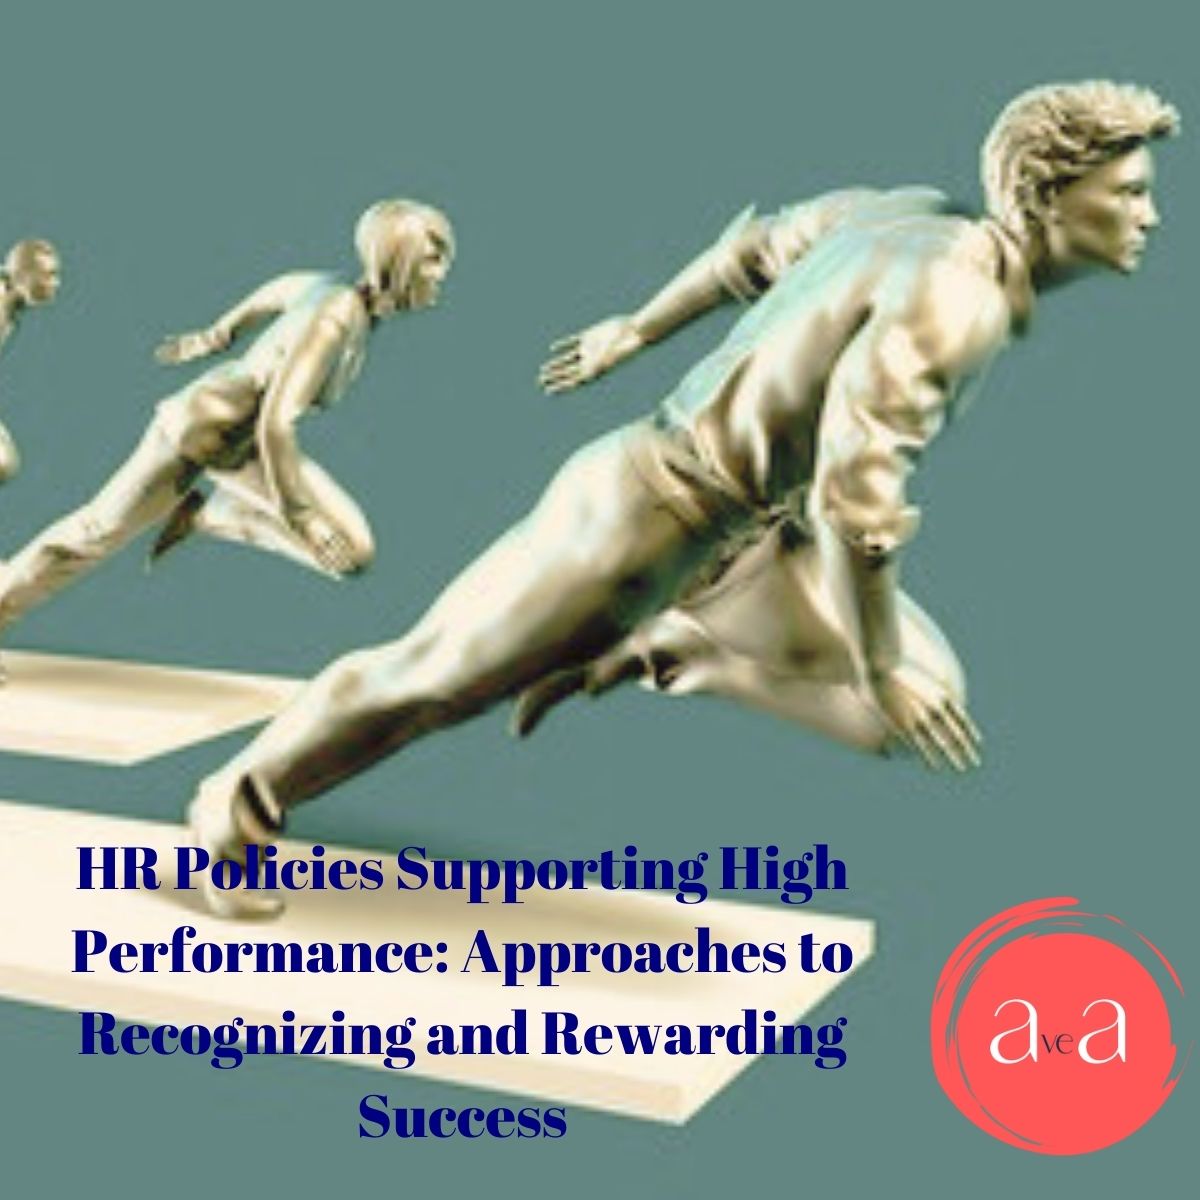 HR Policies Supporting High Performance: Approaches to Recognizing and Rewarding Success